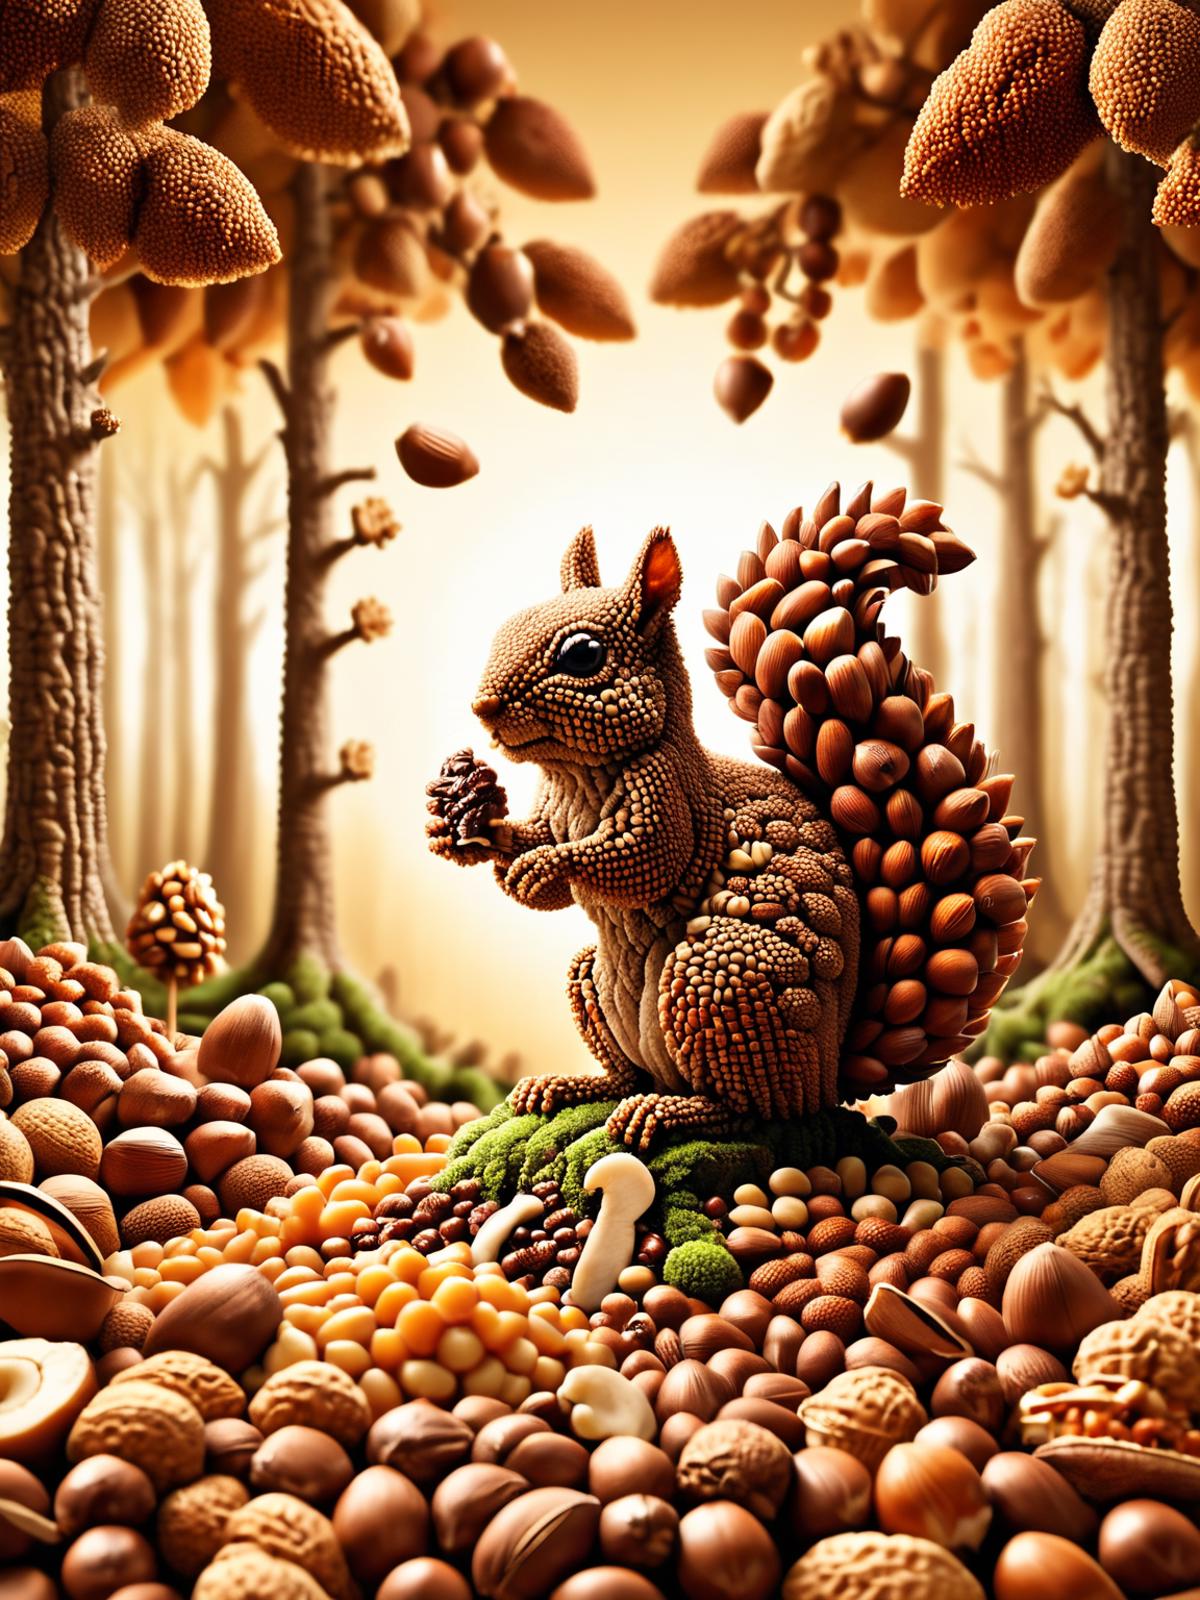 Squirrel sculpture made of nuts and candy, sitting in a forest setting.